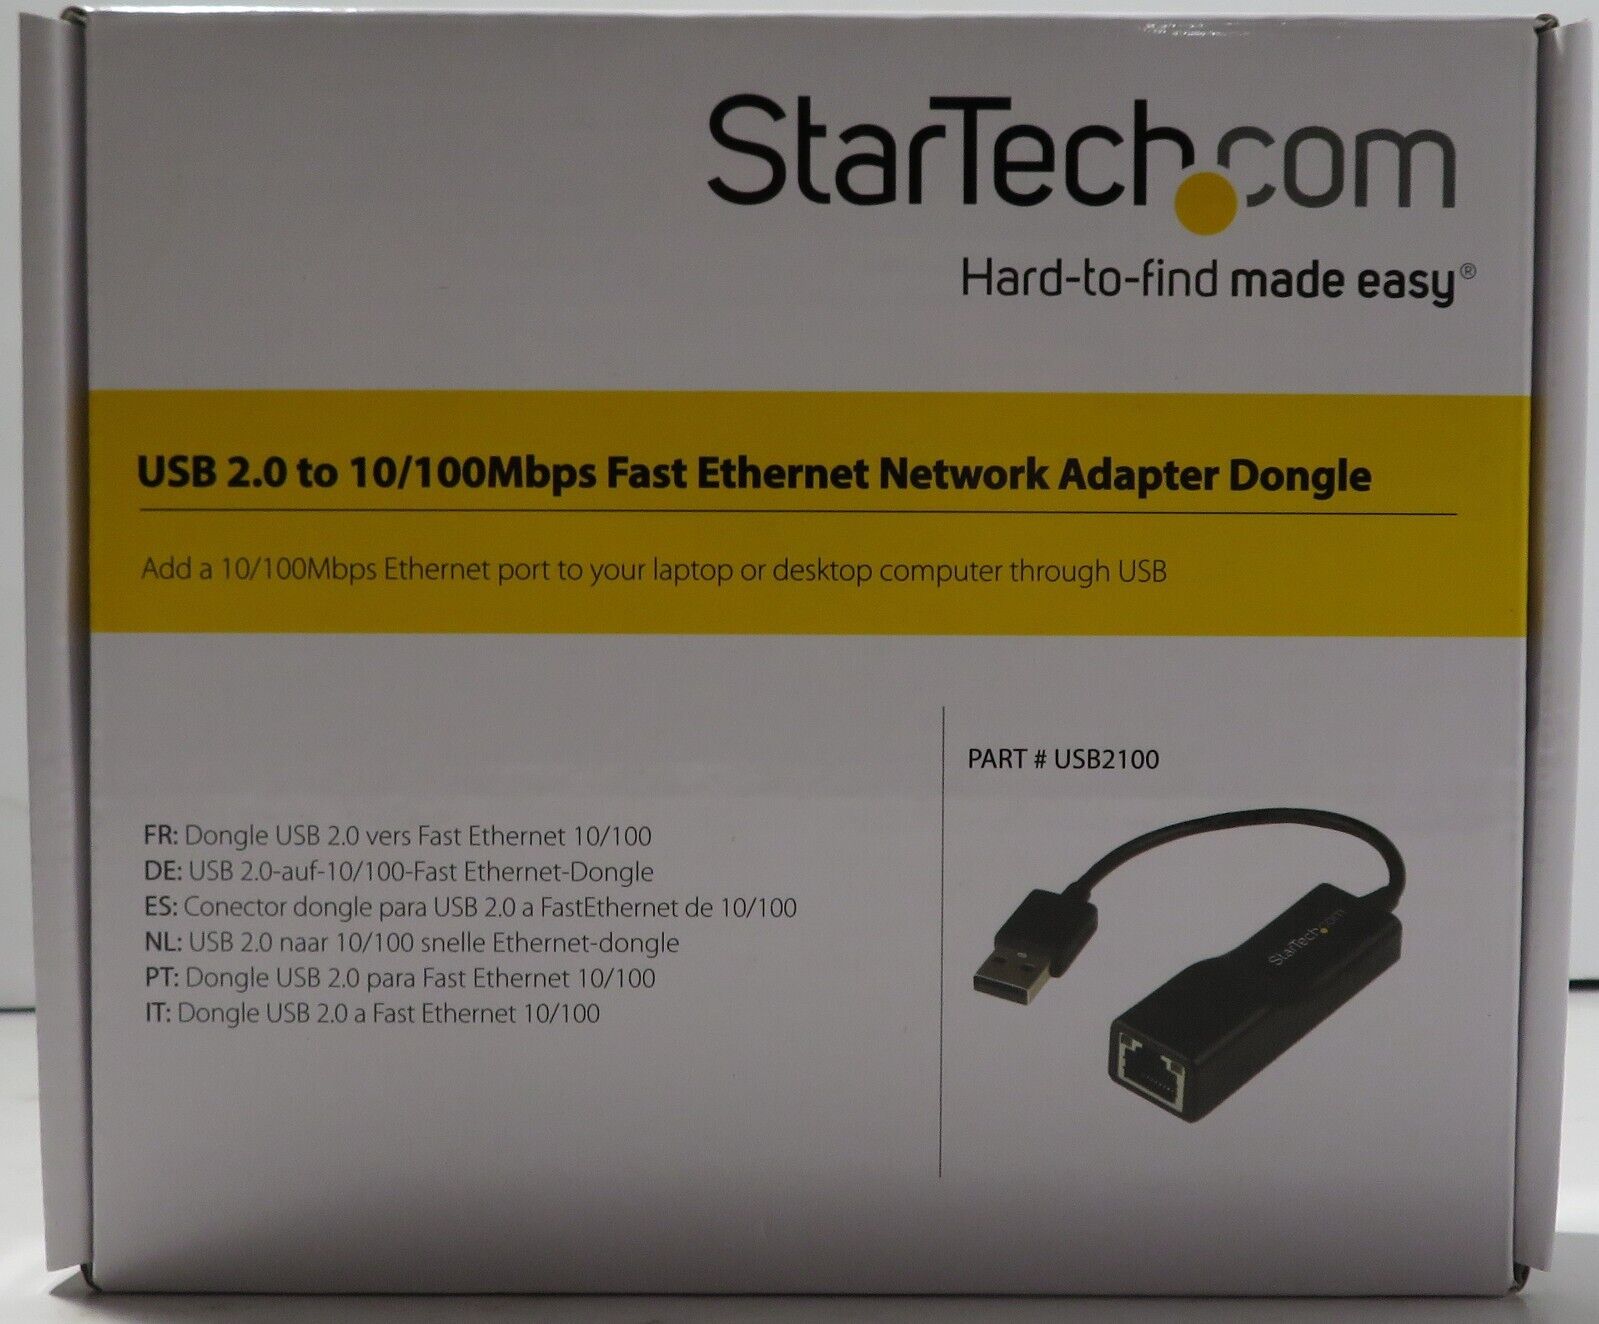 Startech USB2100 USB 2.0 to 10/100 Mbps Ethernet Network Adapter Dongle